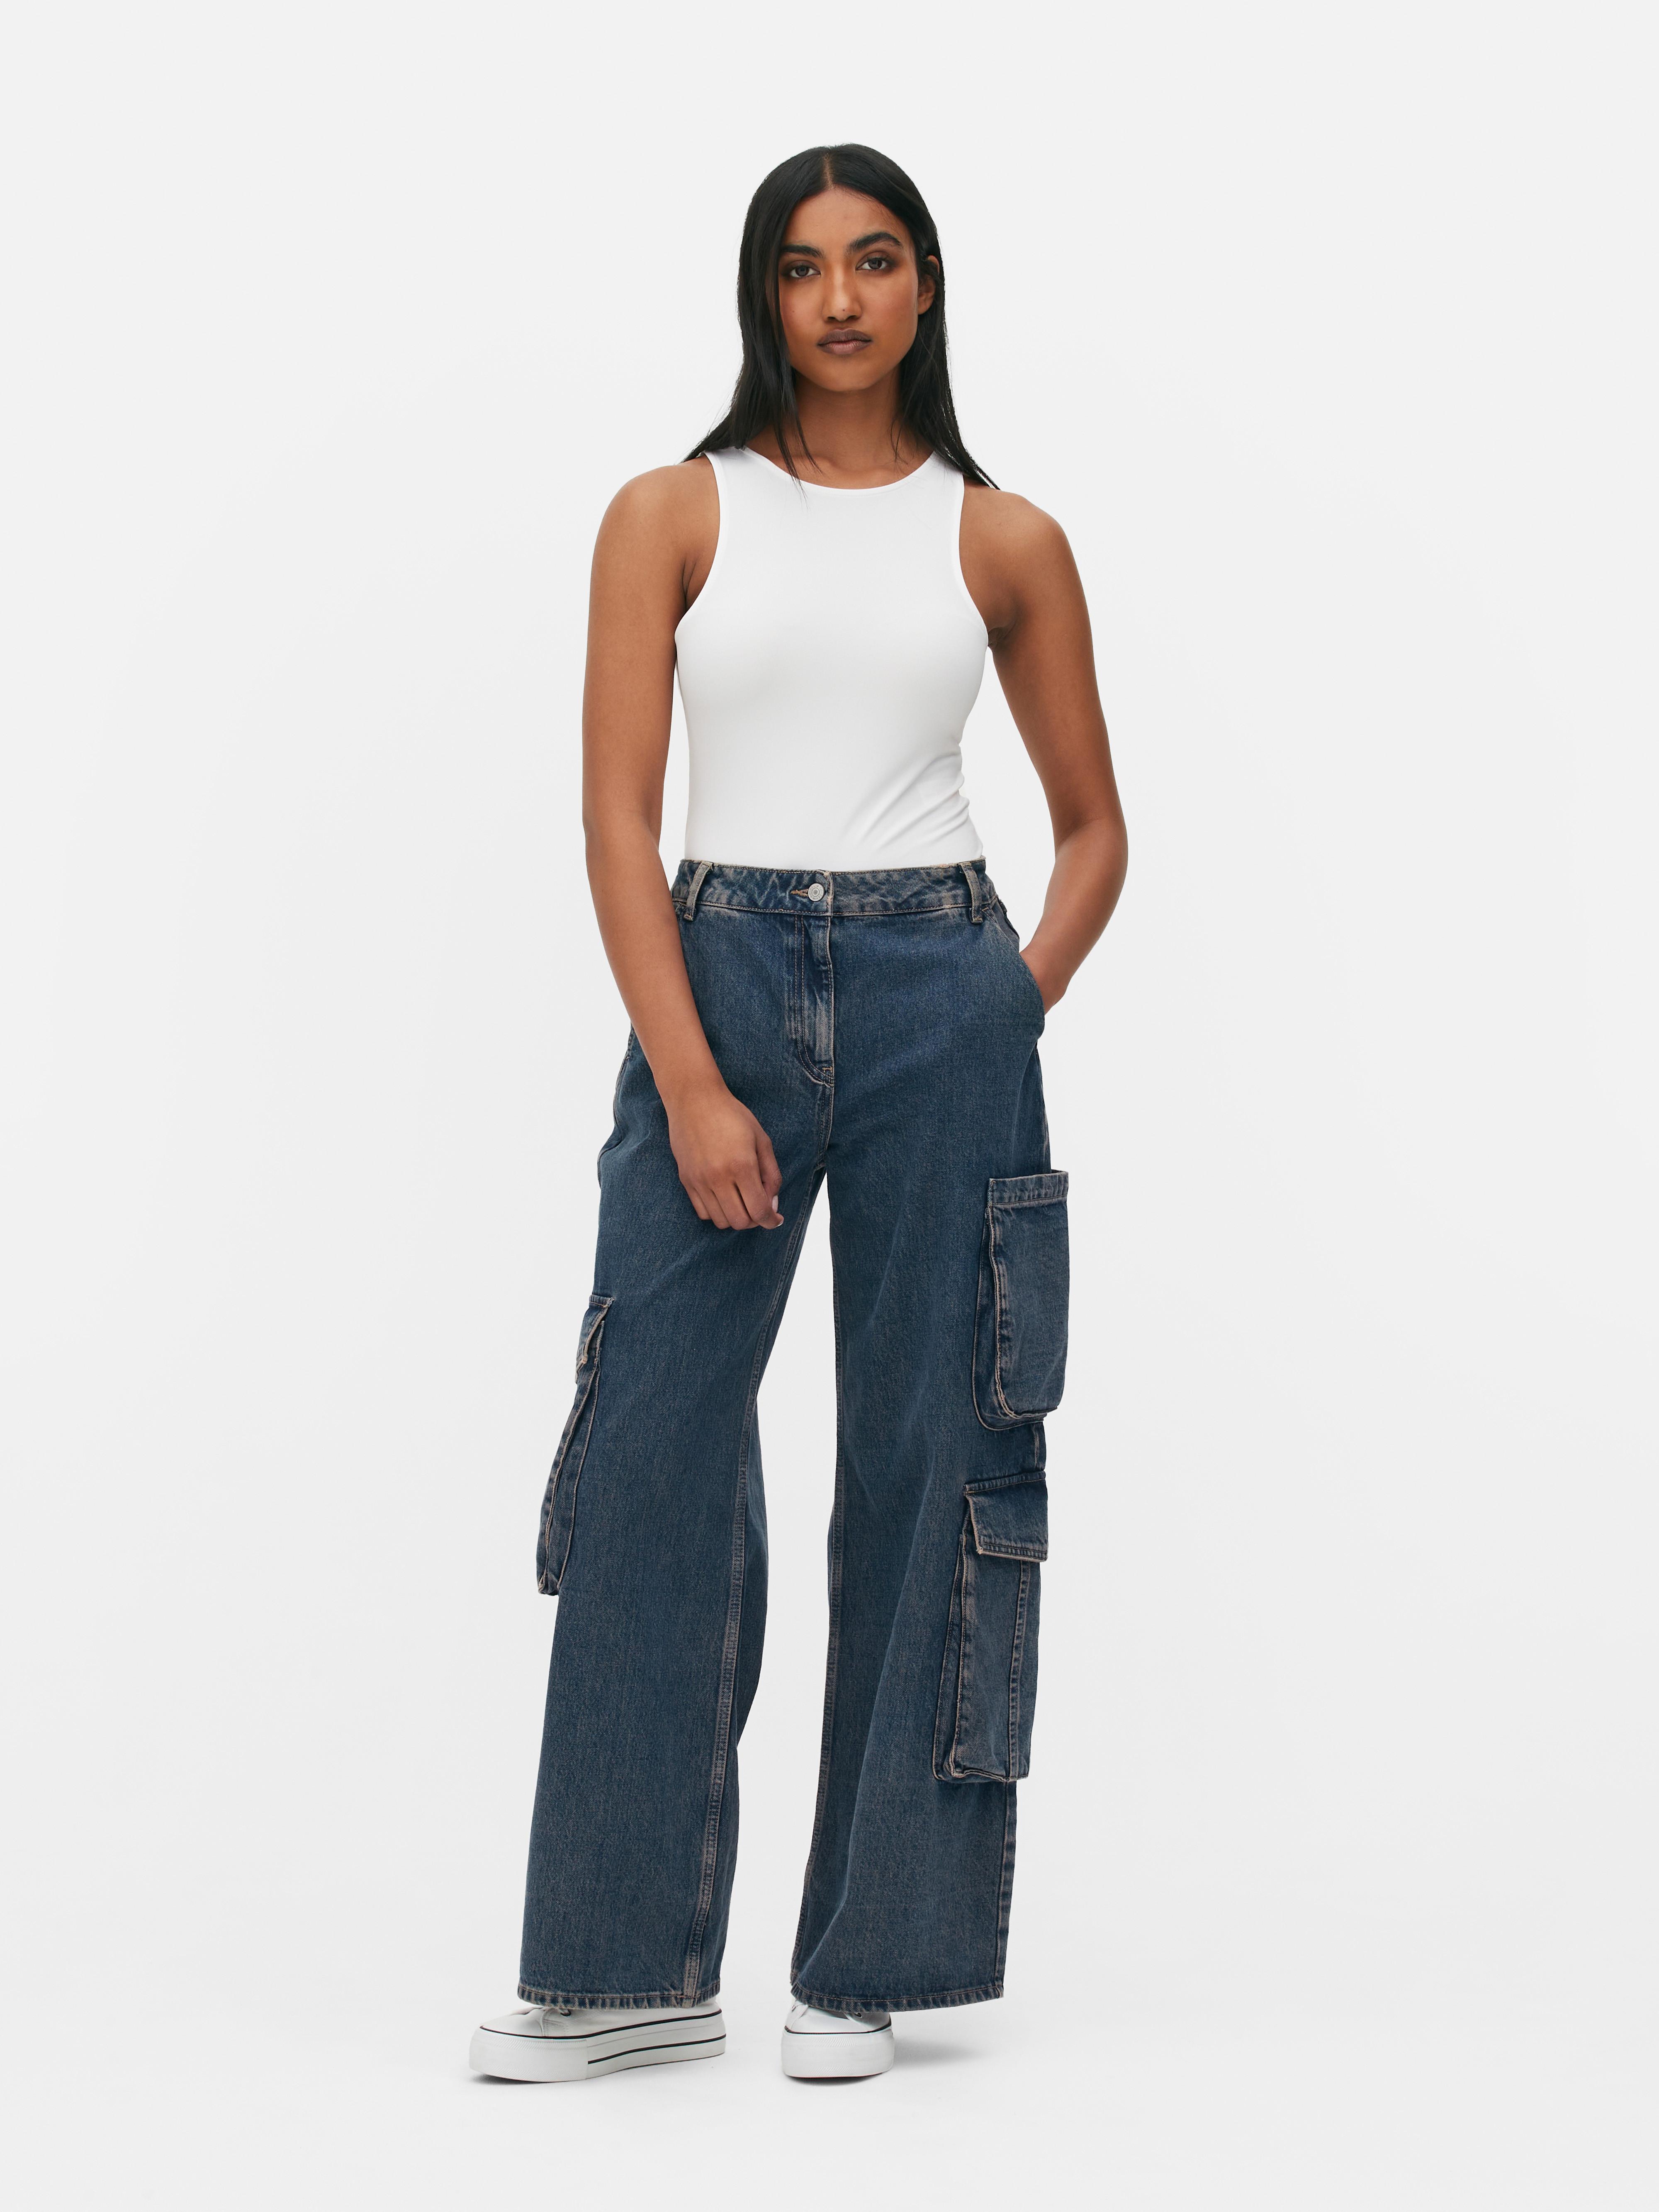 Women's Jeans, Skinny, Ripped, Flared & Mom Jeans for Women